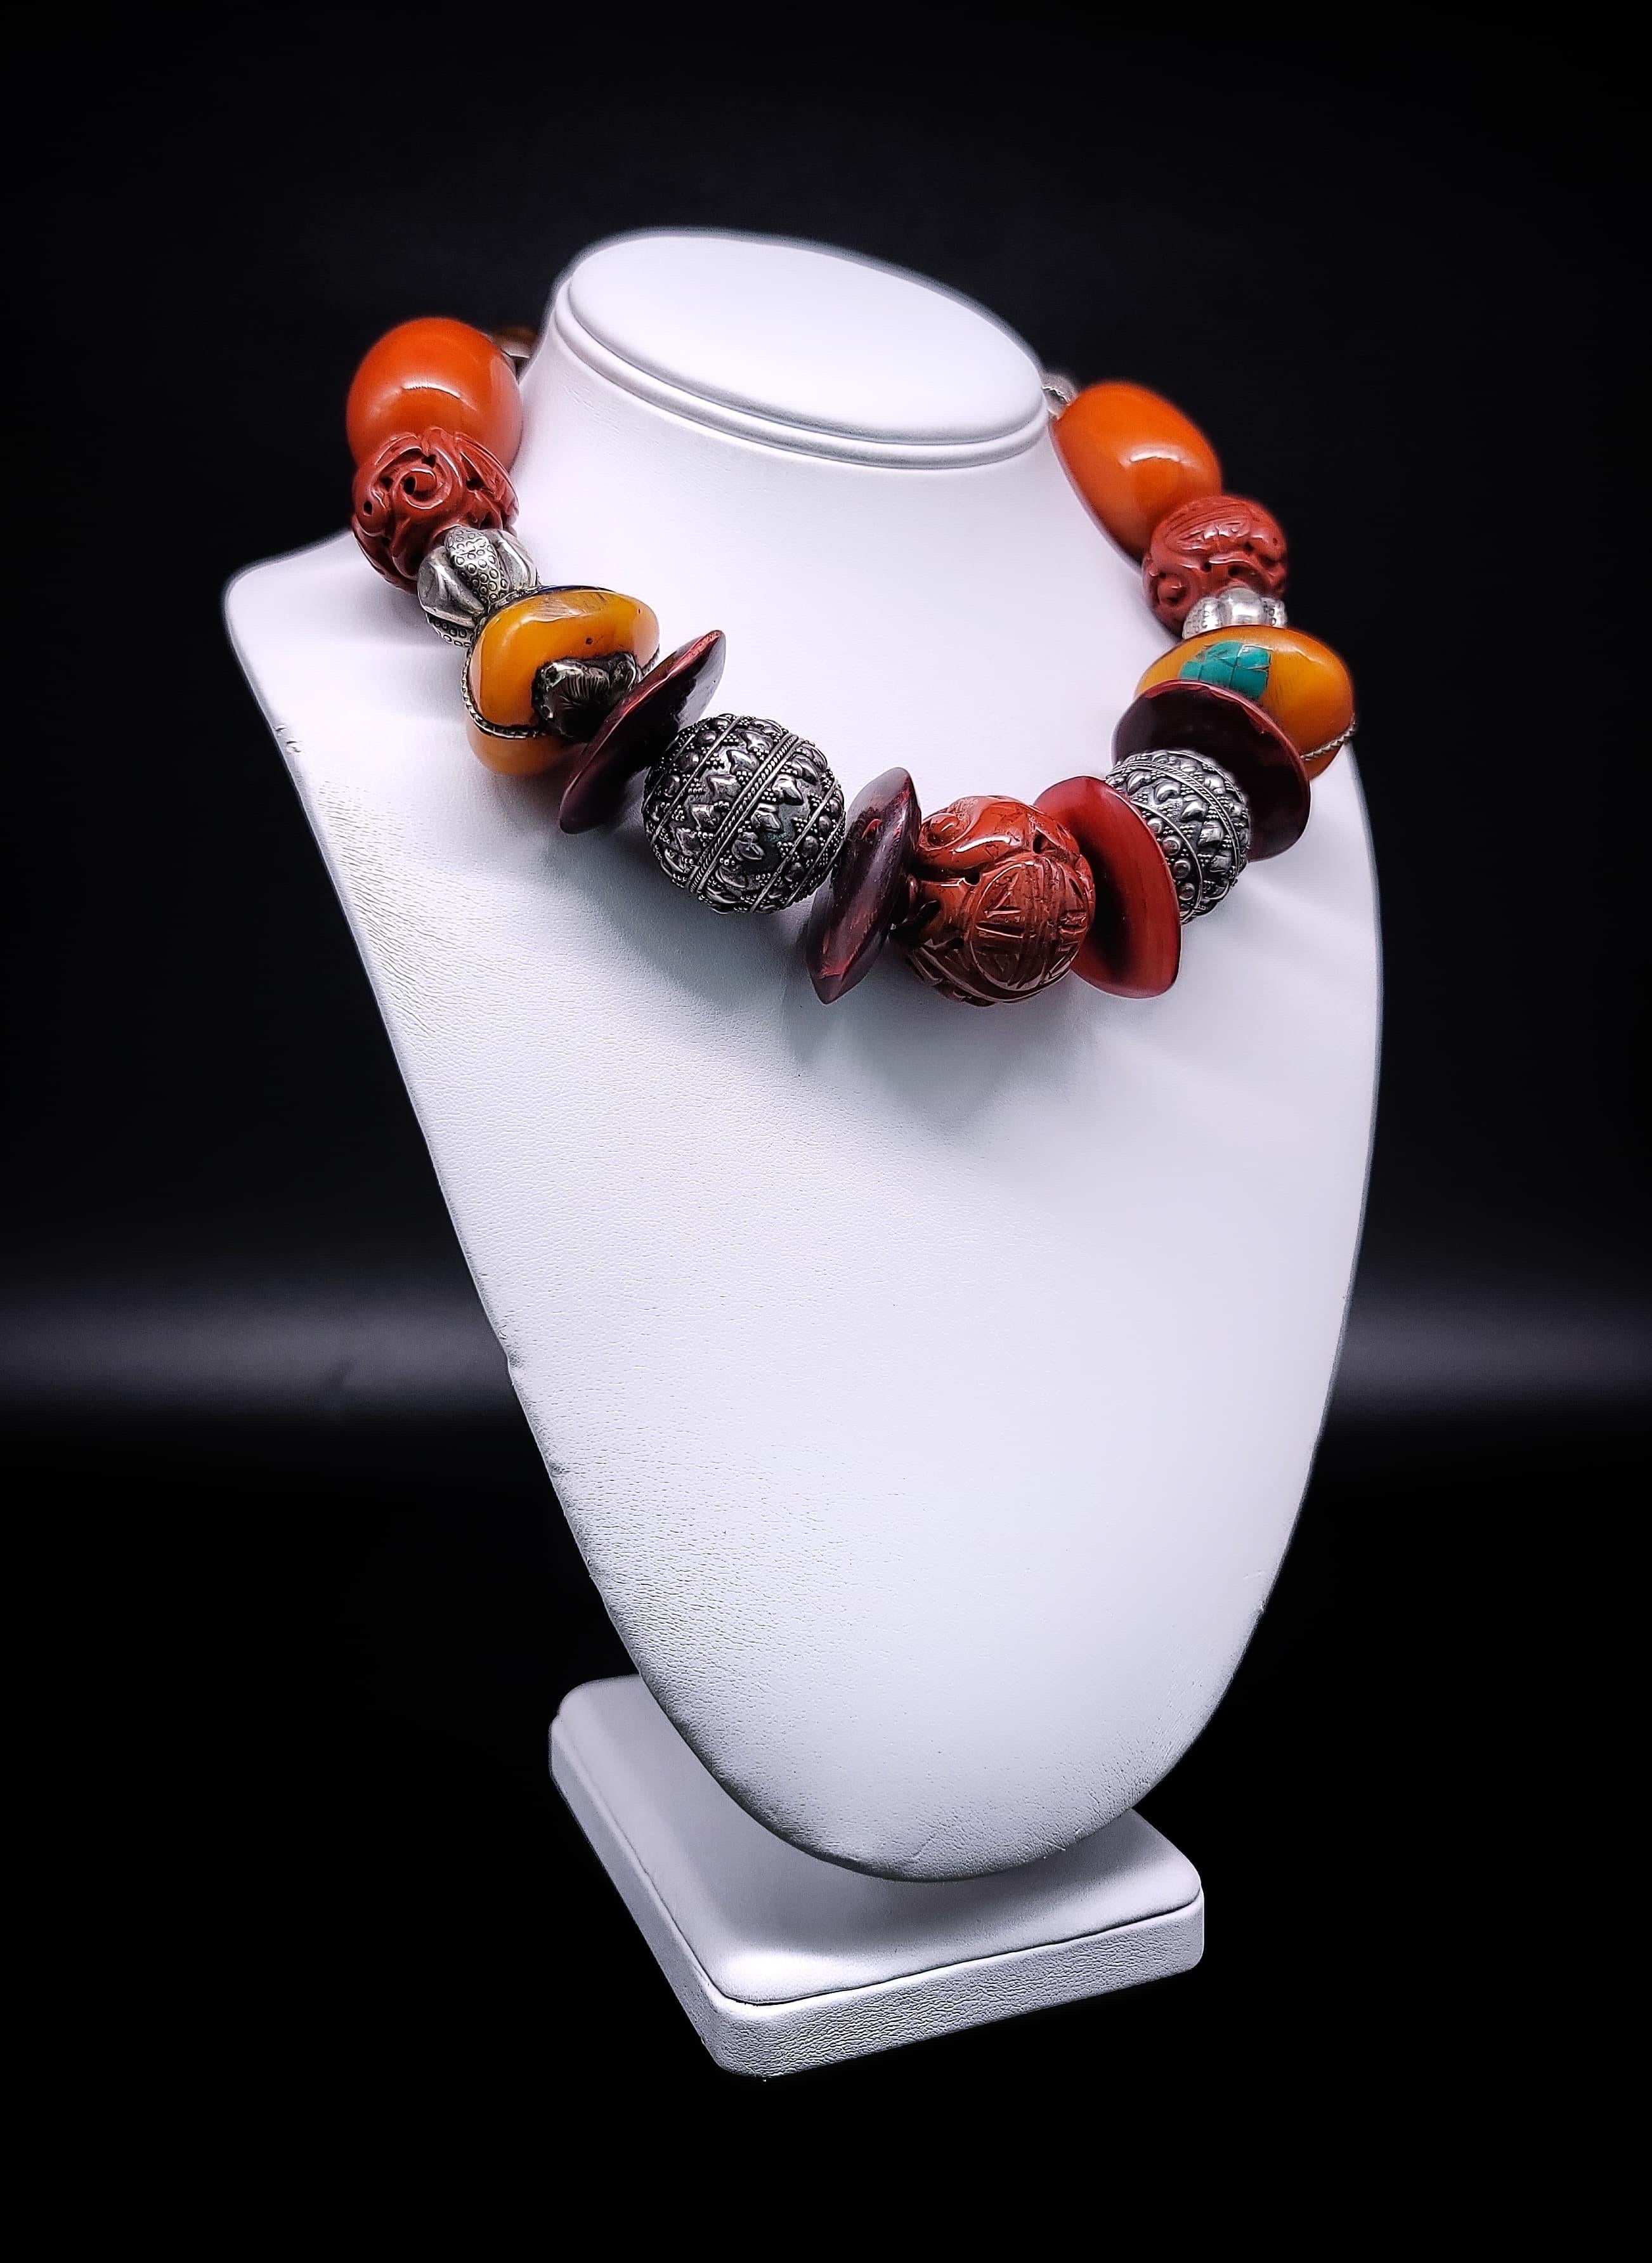 Mixed Cut A.Jeschel Tibetan Amber necklace with Carved Ceramic.